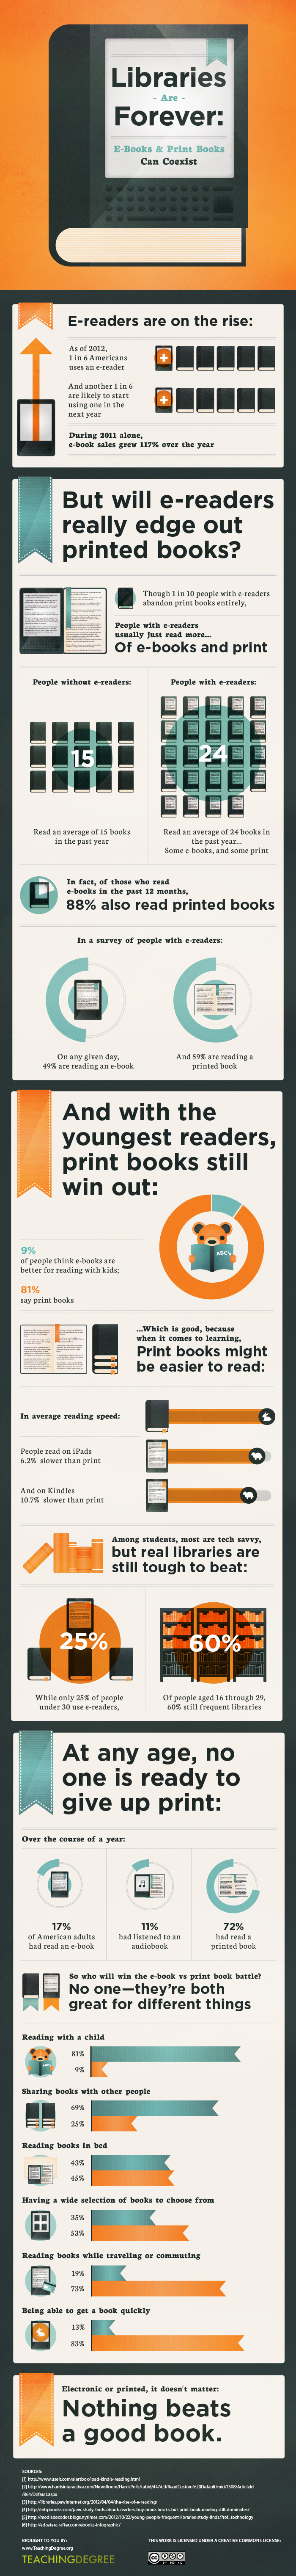 book vs ebook infographic by TeachingDegree